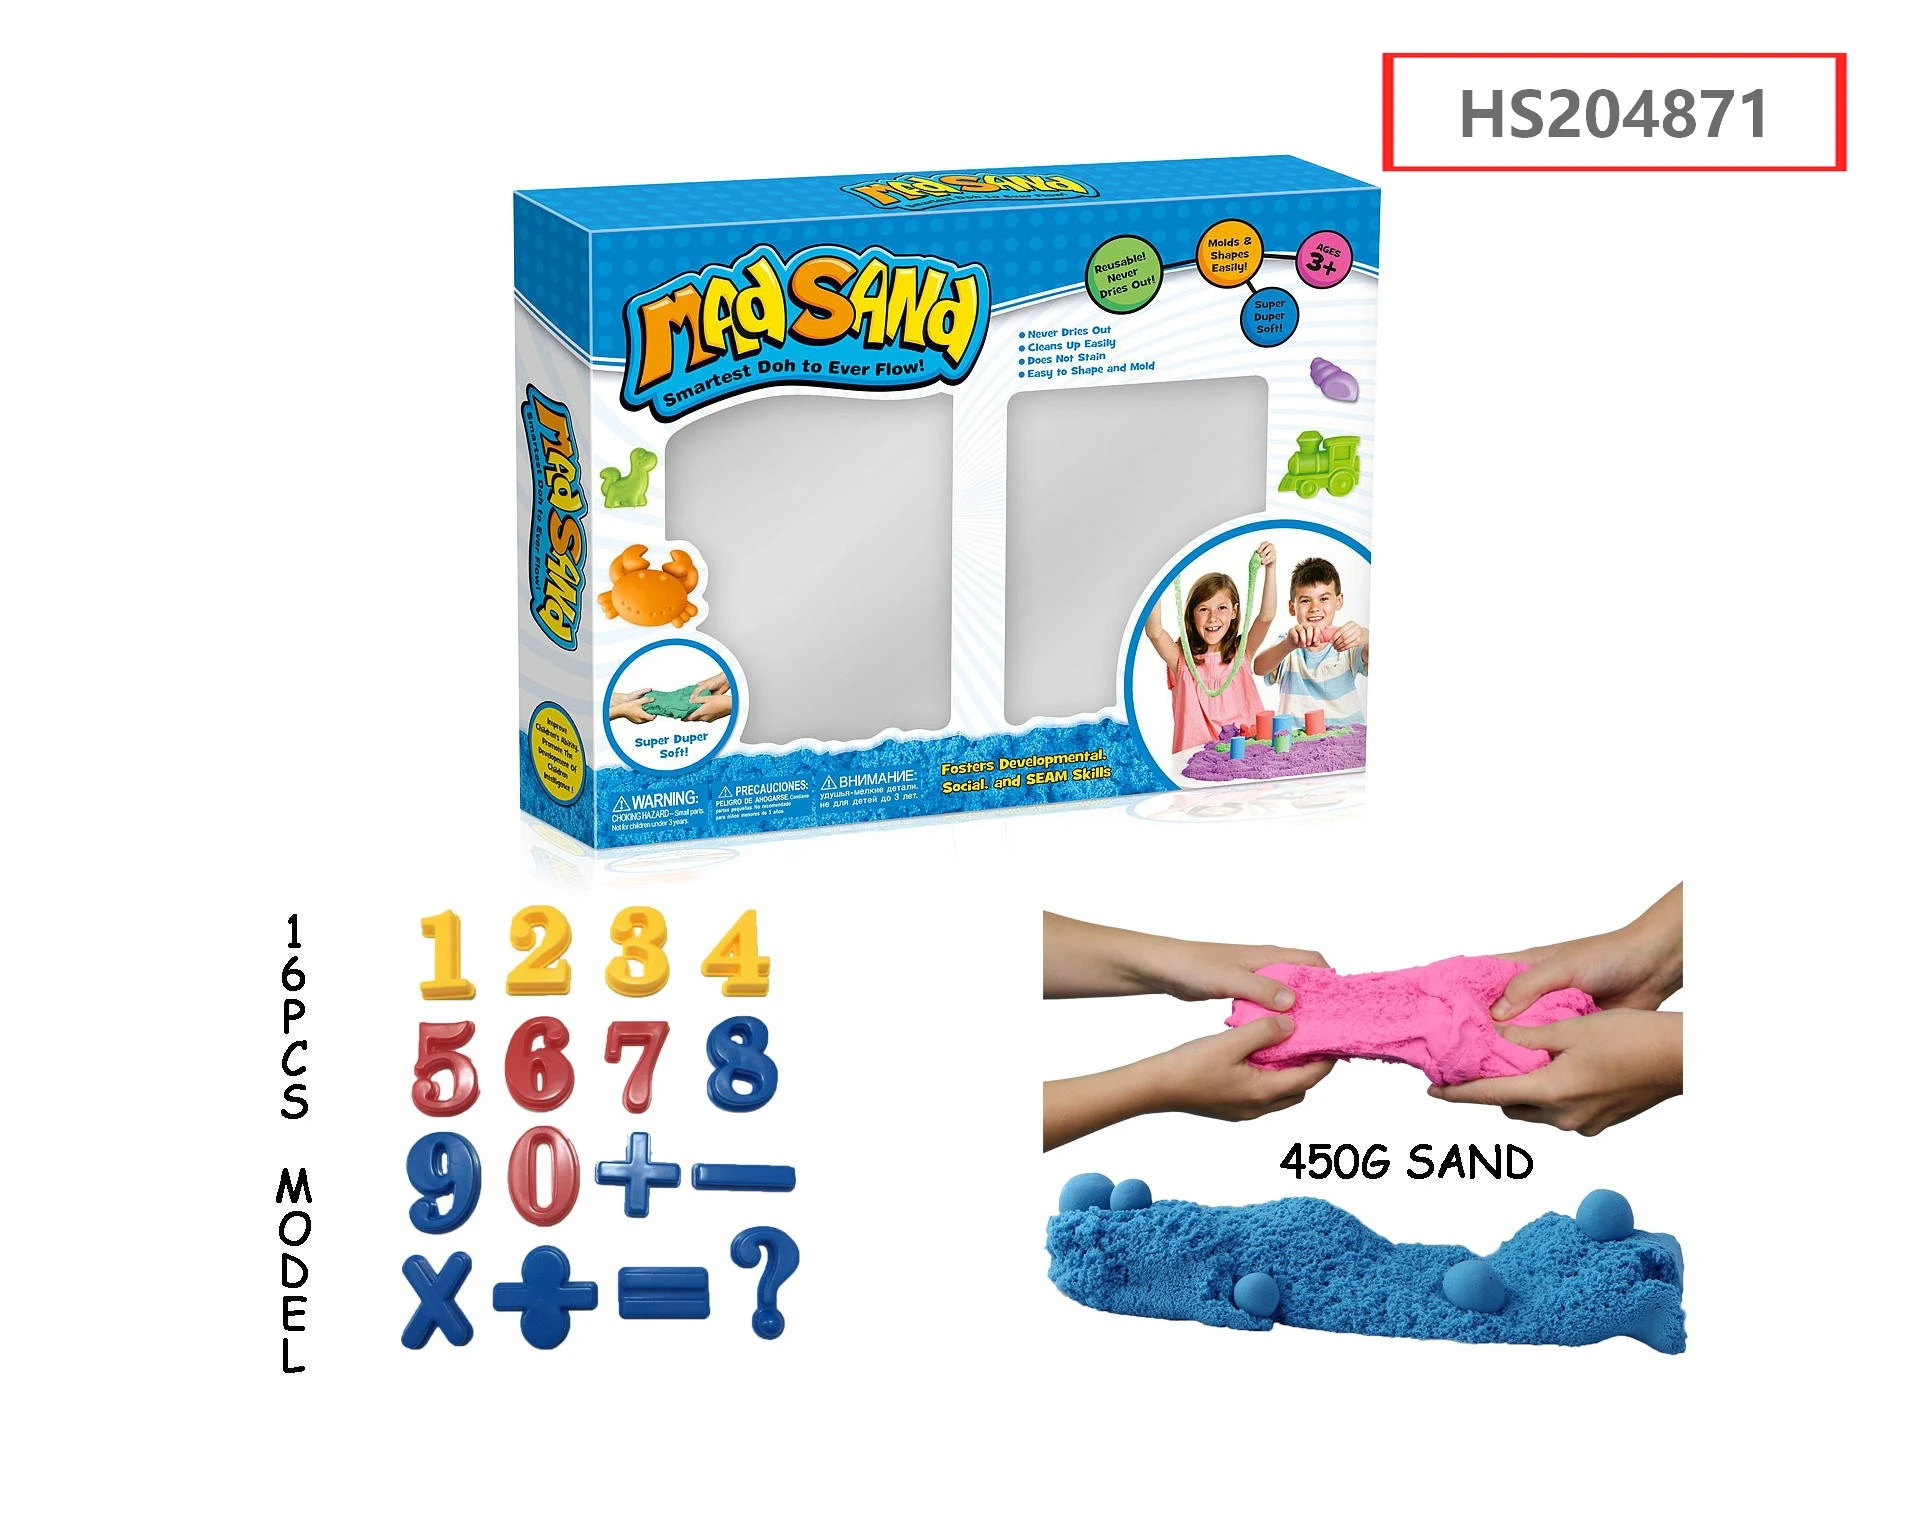 HS204871, Huwsin Toys, Educational toy, DIY Mad sand